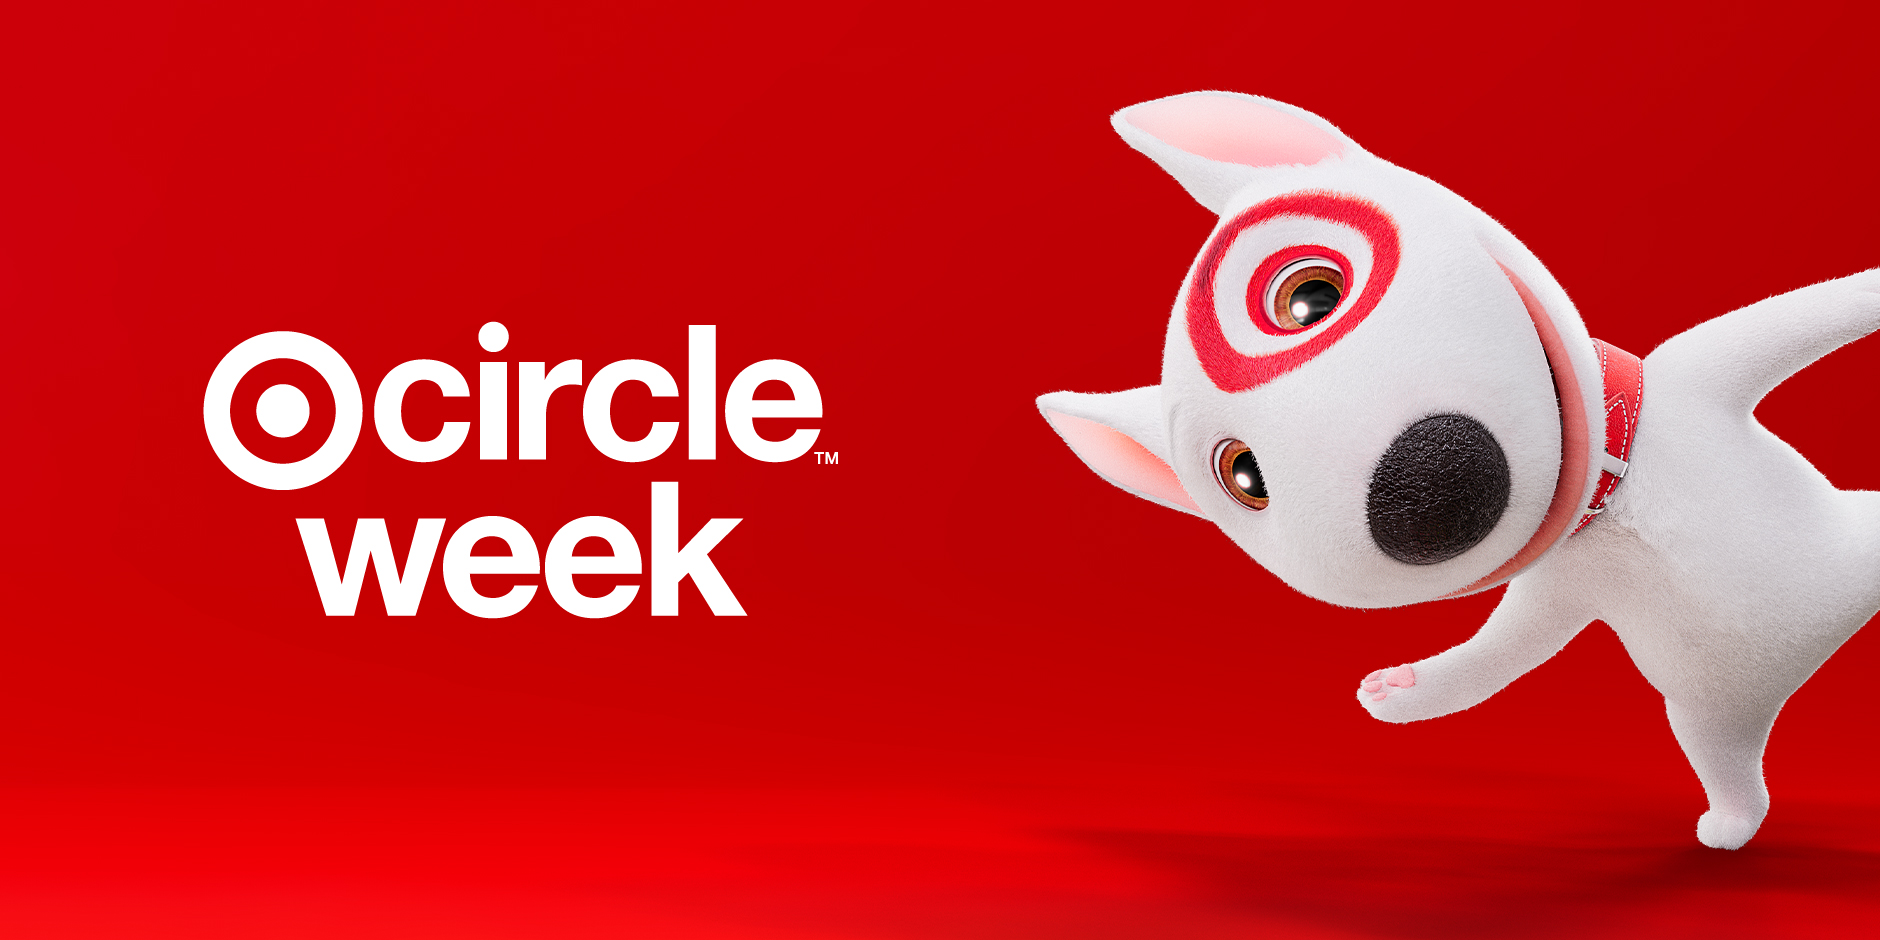 A red background with the Target Bullseye logo next to the words “Circle week” and an animated Bullseye the Dog image leaning sideways and waving.